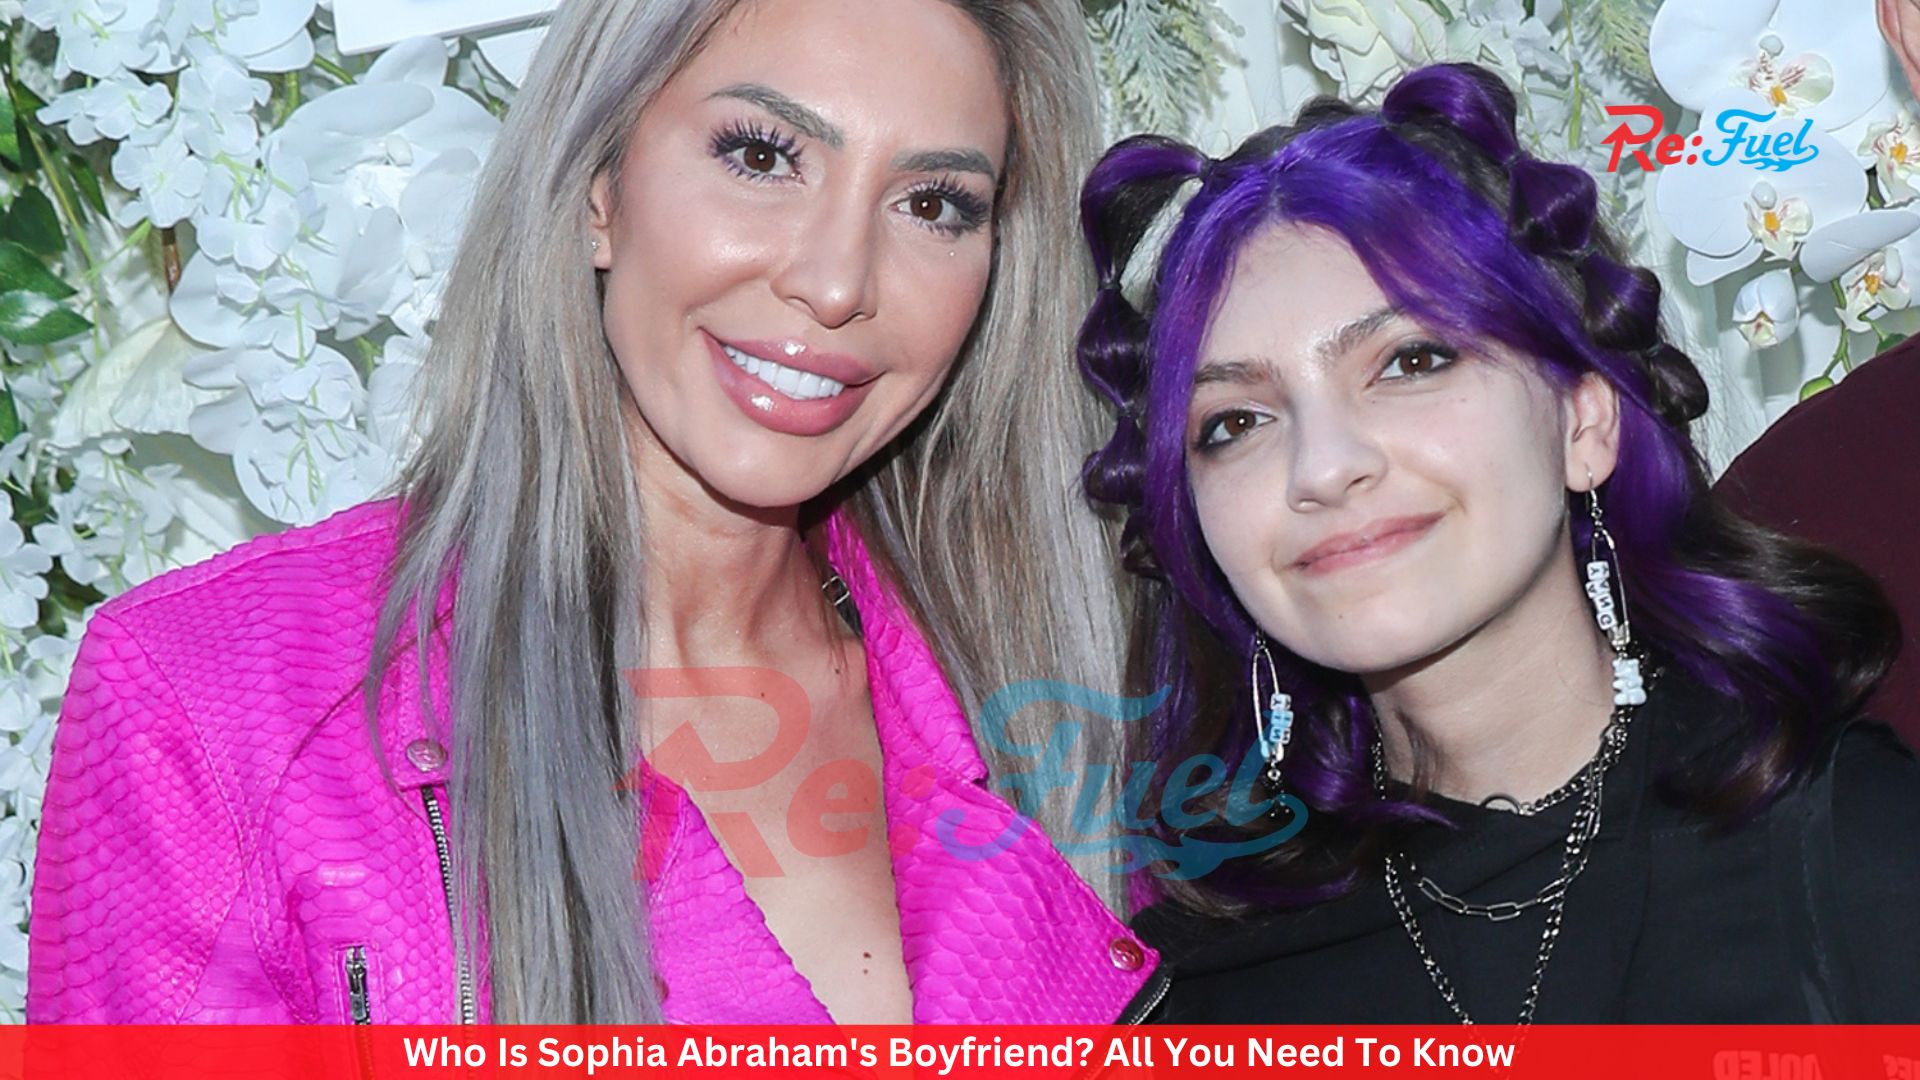 Who Is Sophia Abraham's Boyfriend? All You Need To Know